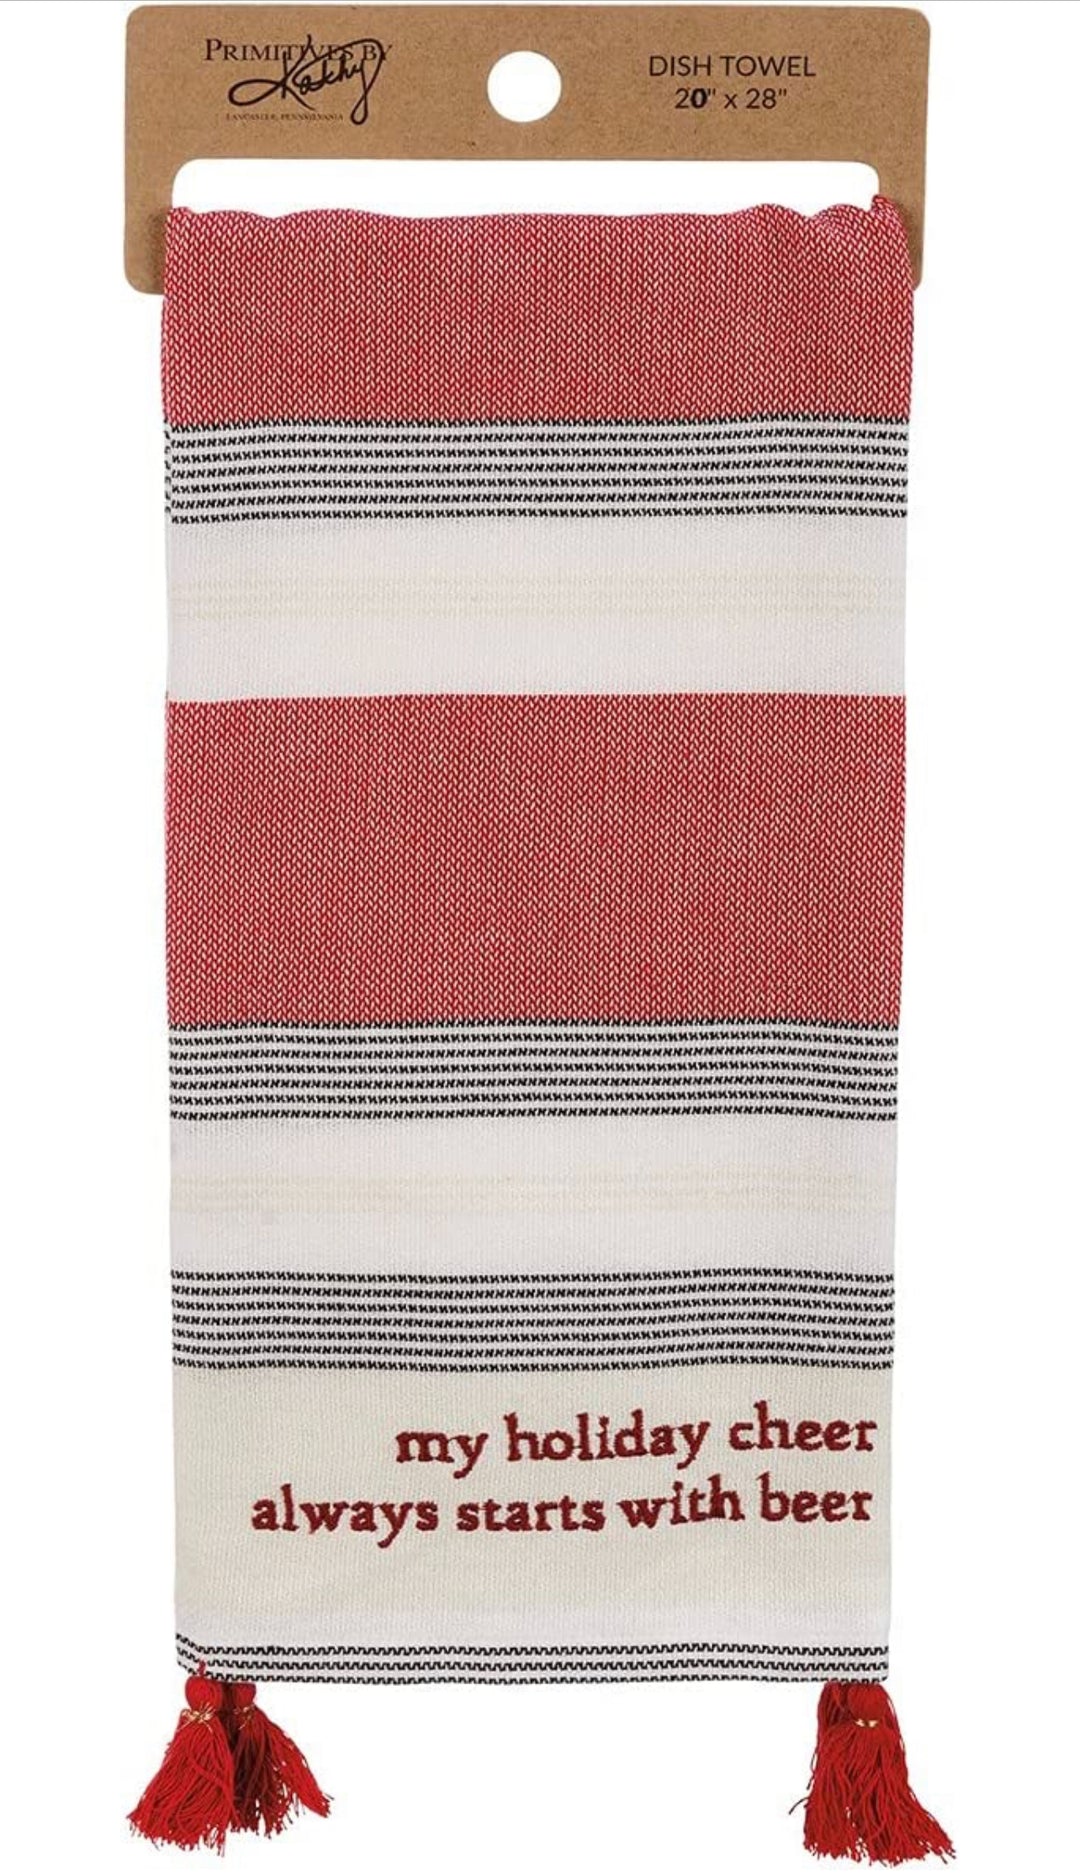 Christmas Towels - The Teal Antler Boutique